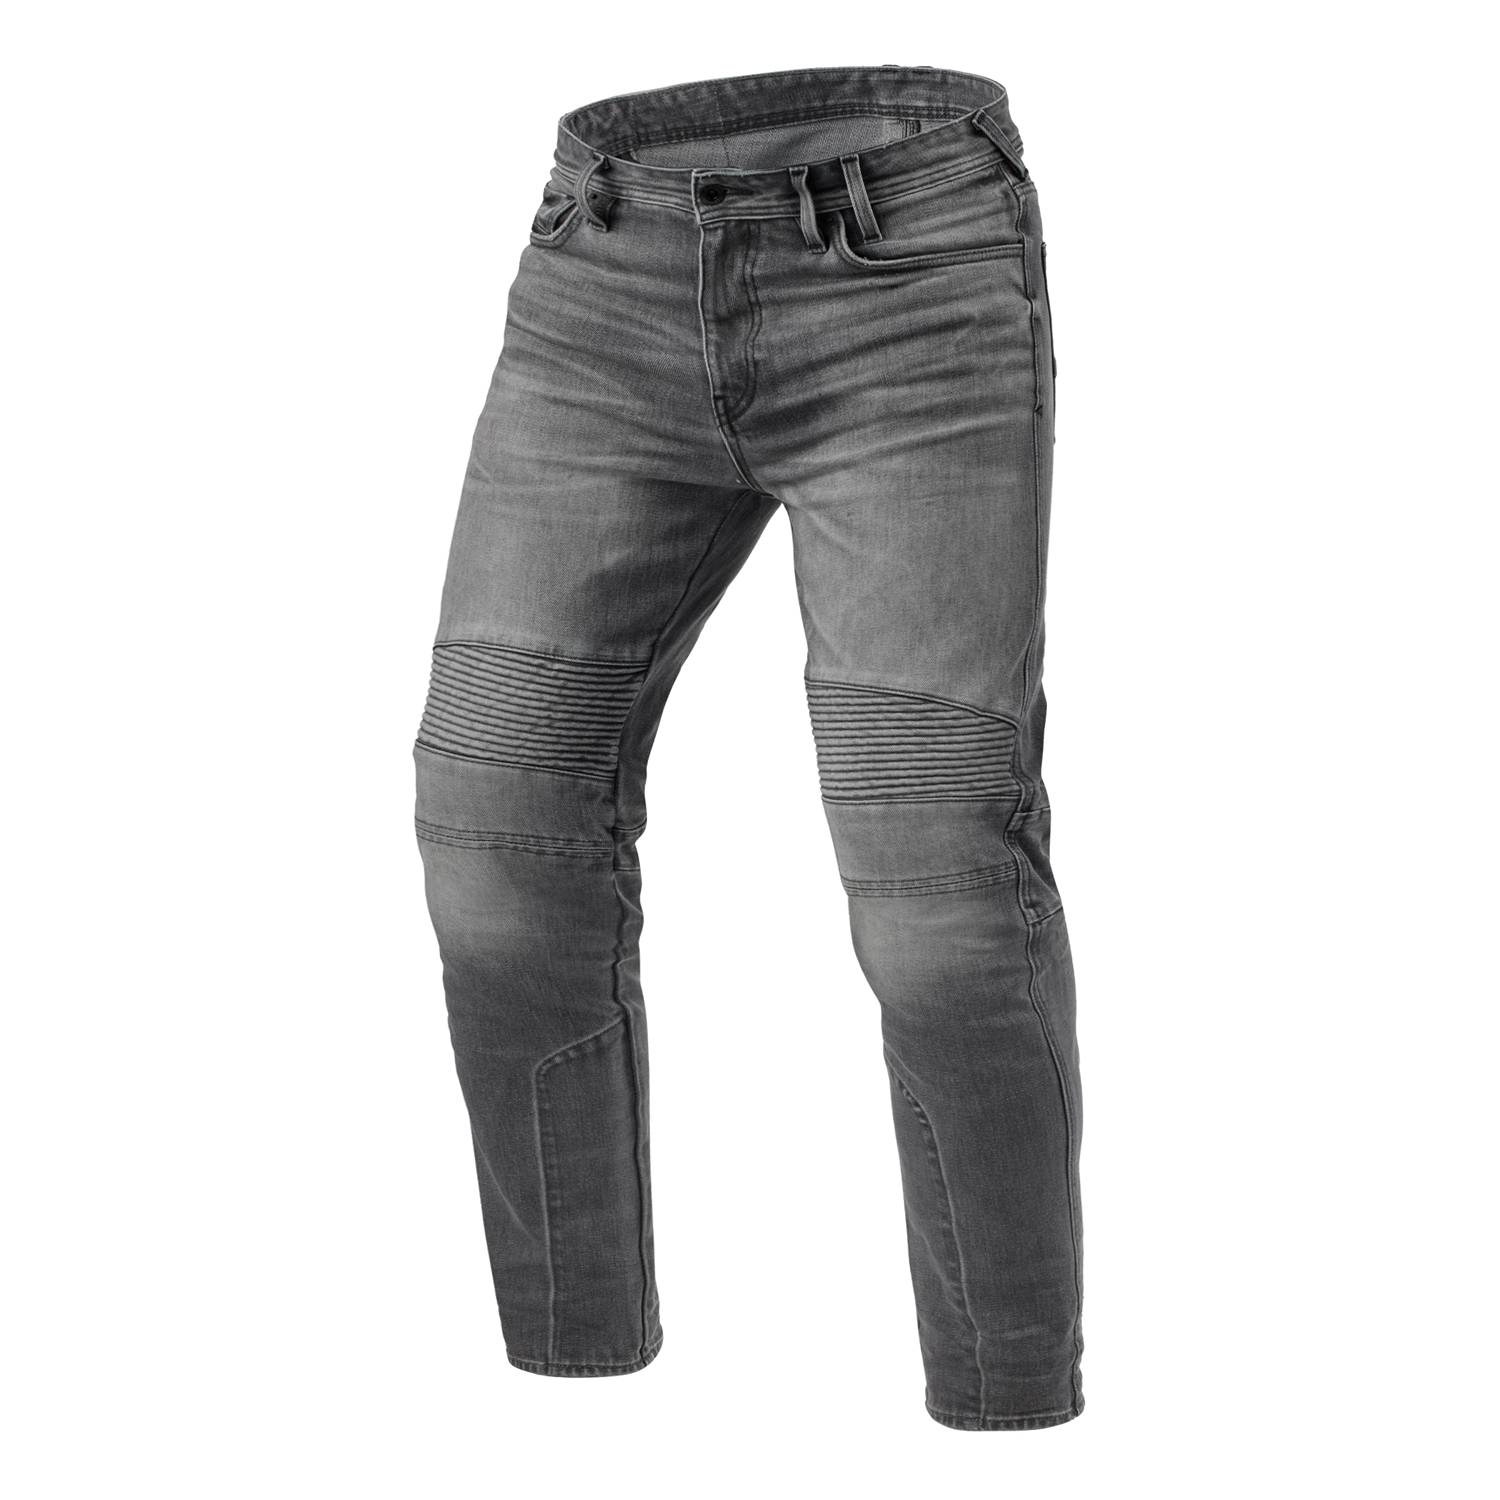 Image of EU REV'IT! Jeans Moto 2 TF Medium Grey Used L36 Motorcycle Jeans Taille L36/W30